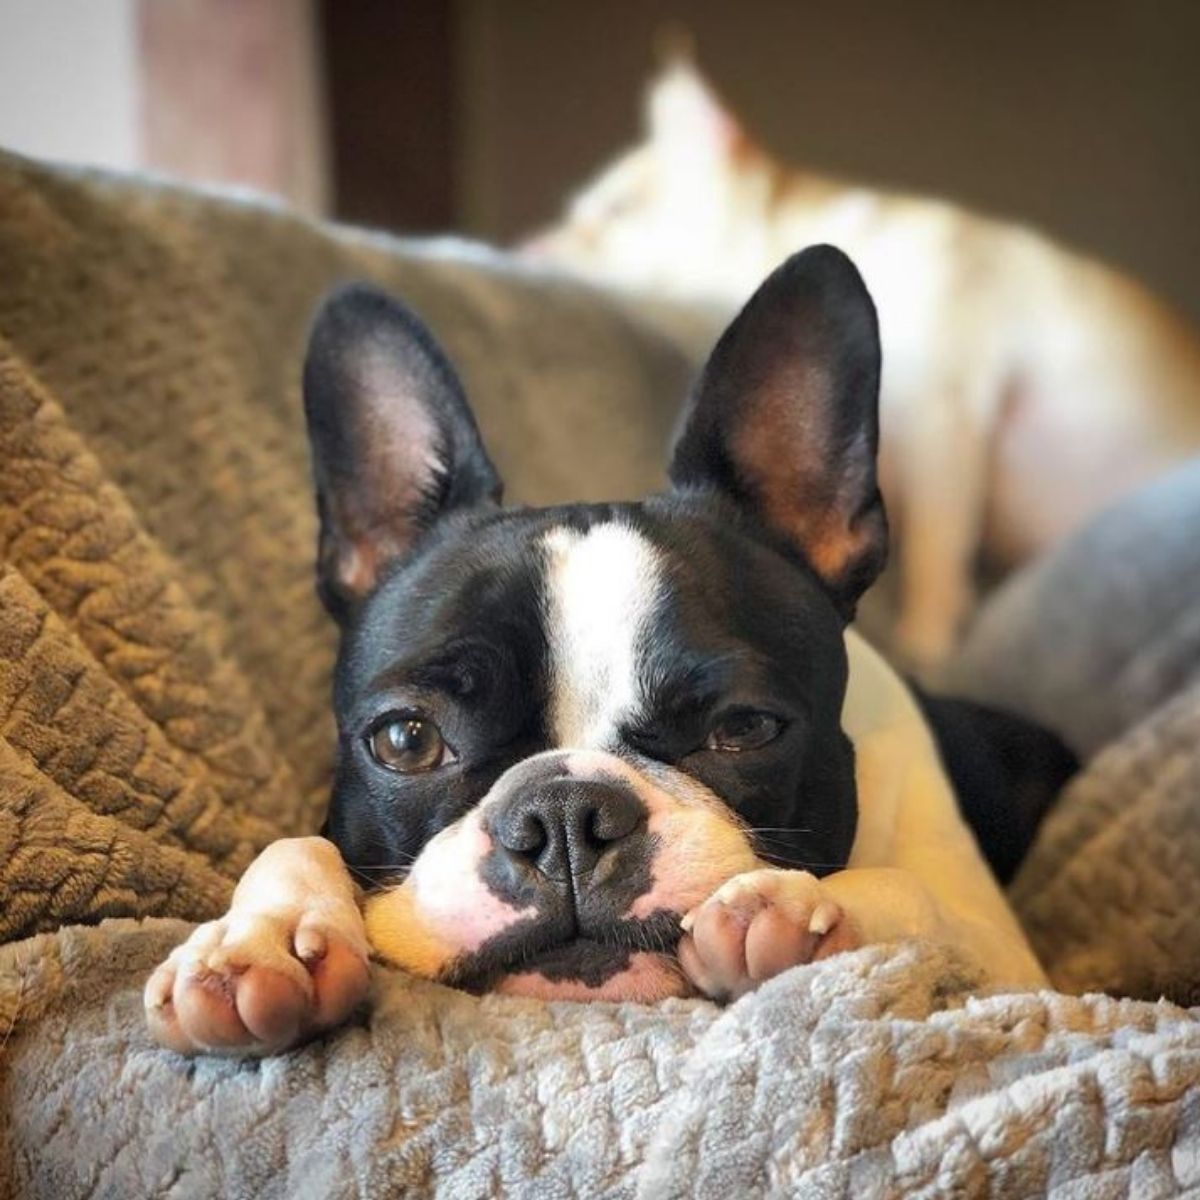 18 French Bulldogs Mixed With Boston Terrier - The Paws